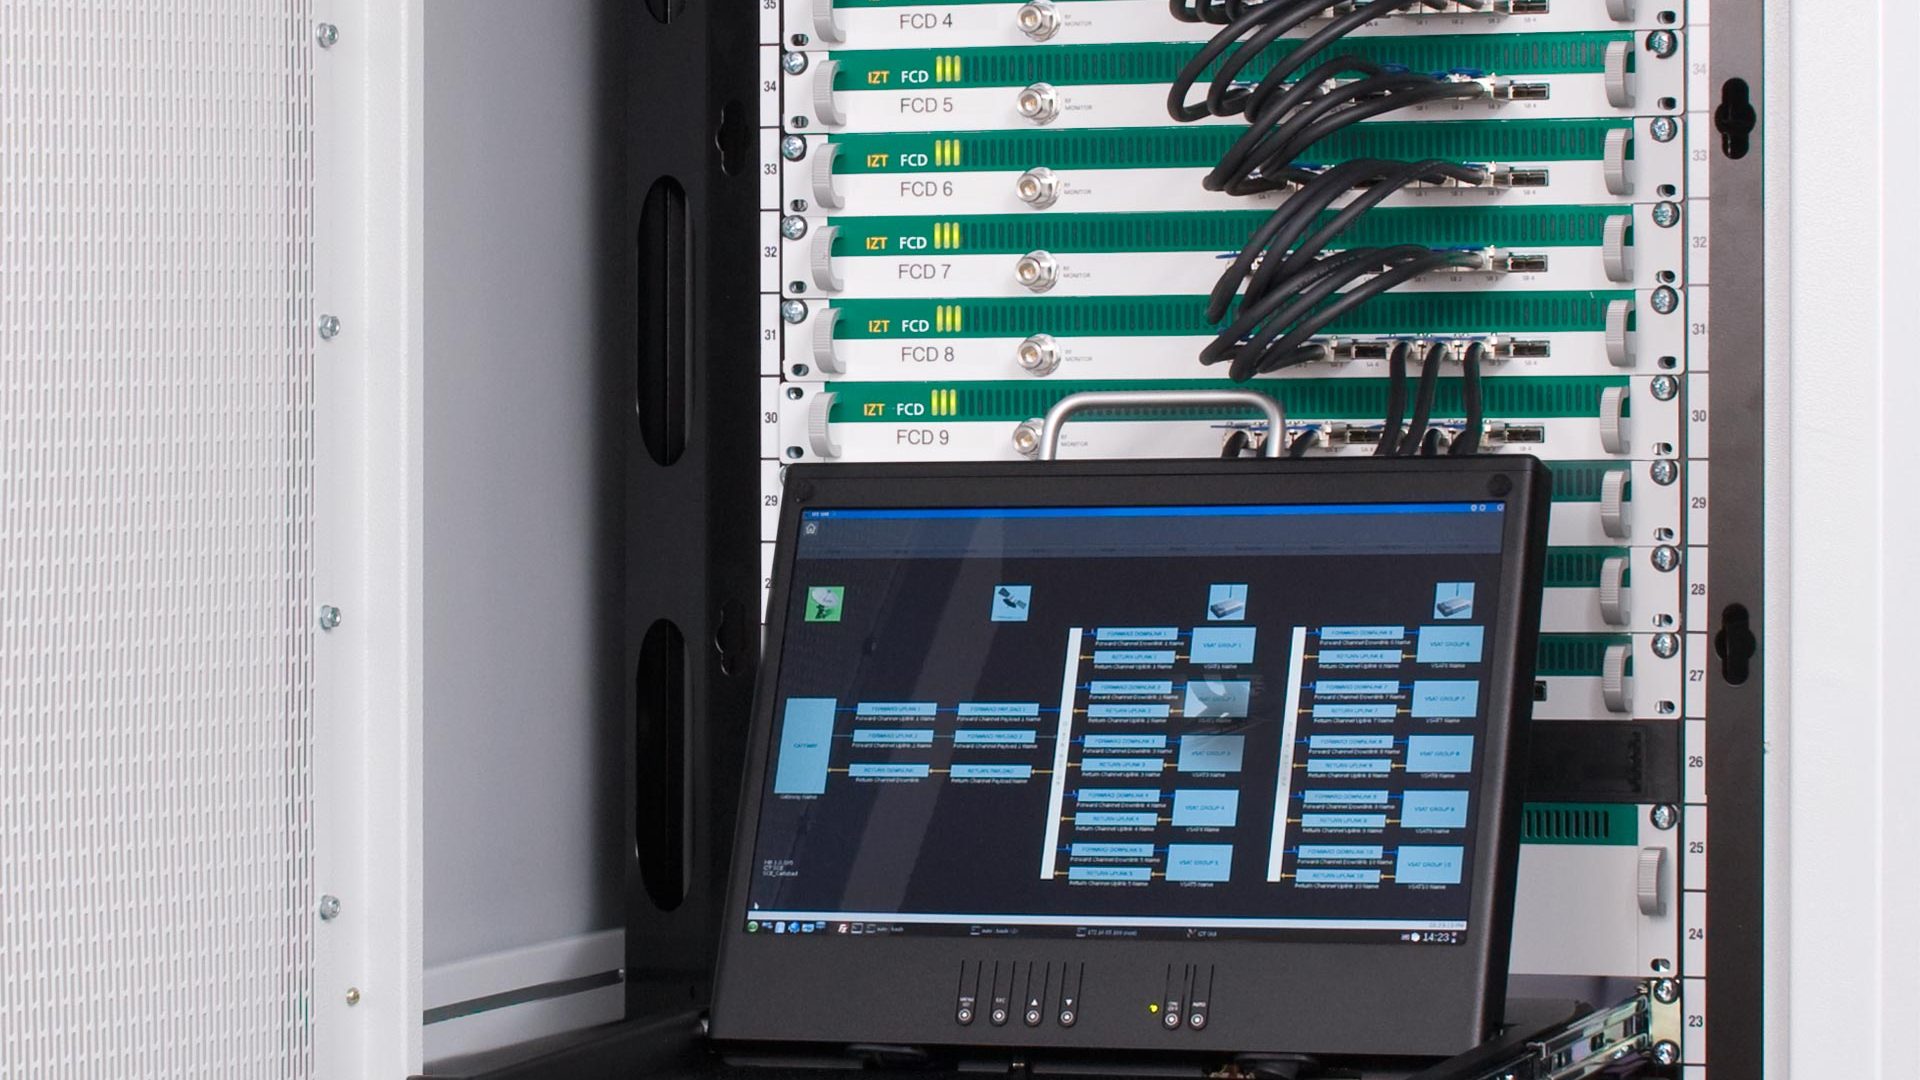 IZT C6000 for synchronous bi-directional satellite Links built-in Rack with Laptop